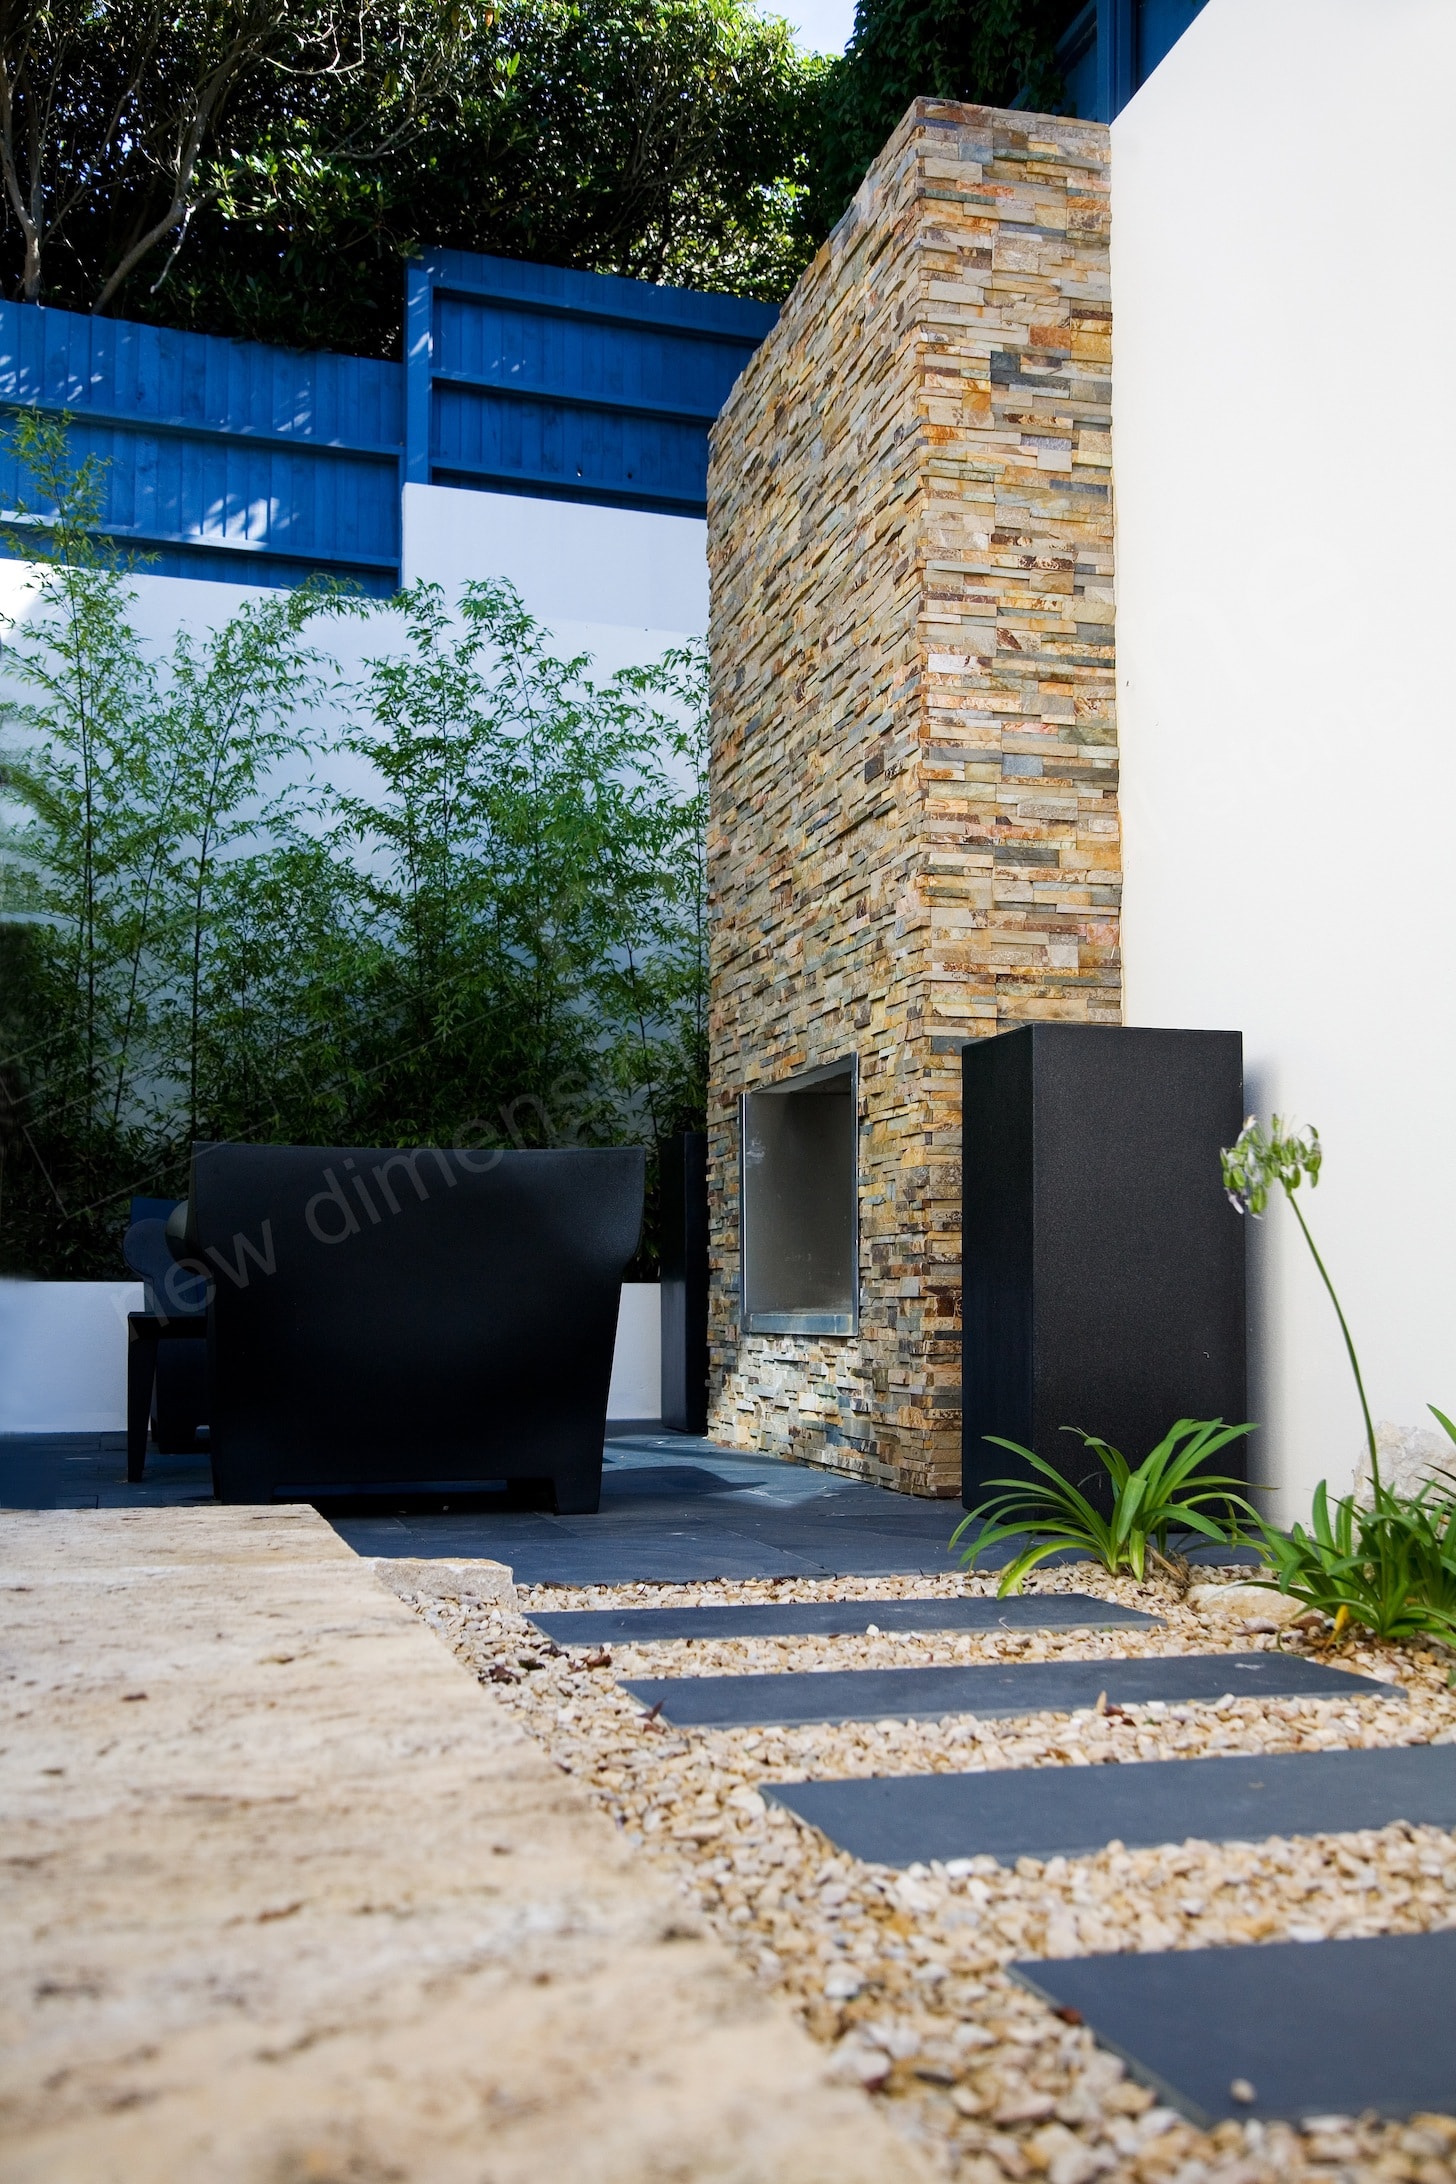 A large two story outdoor fireplace clad with stone veneer and a stainless steel firebox